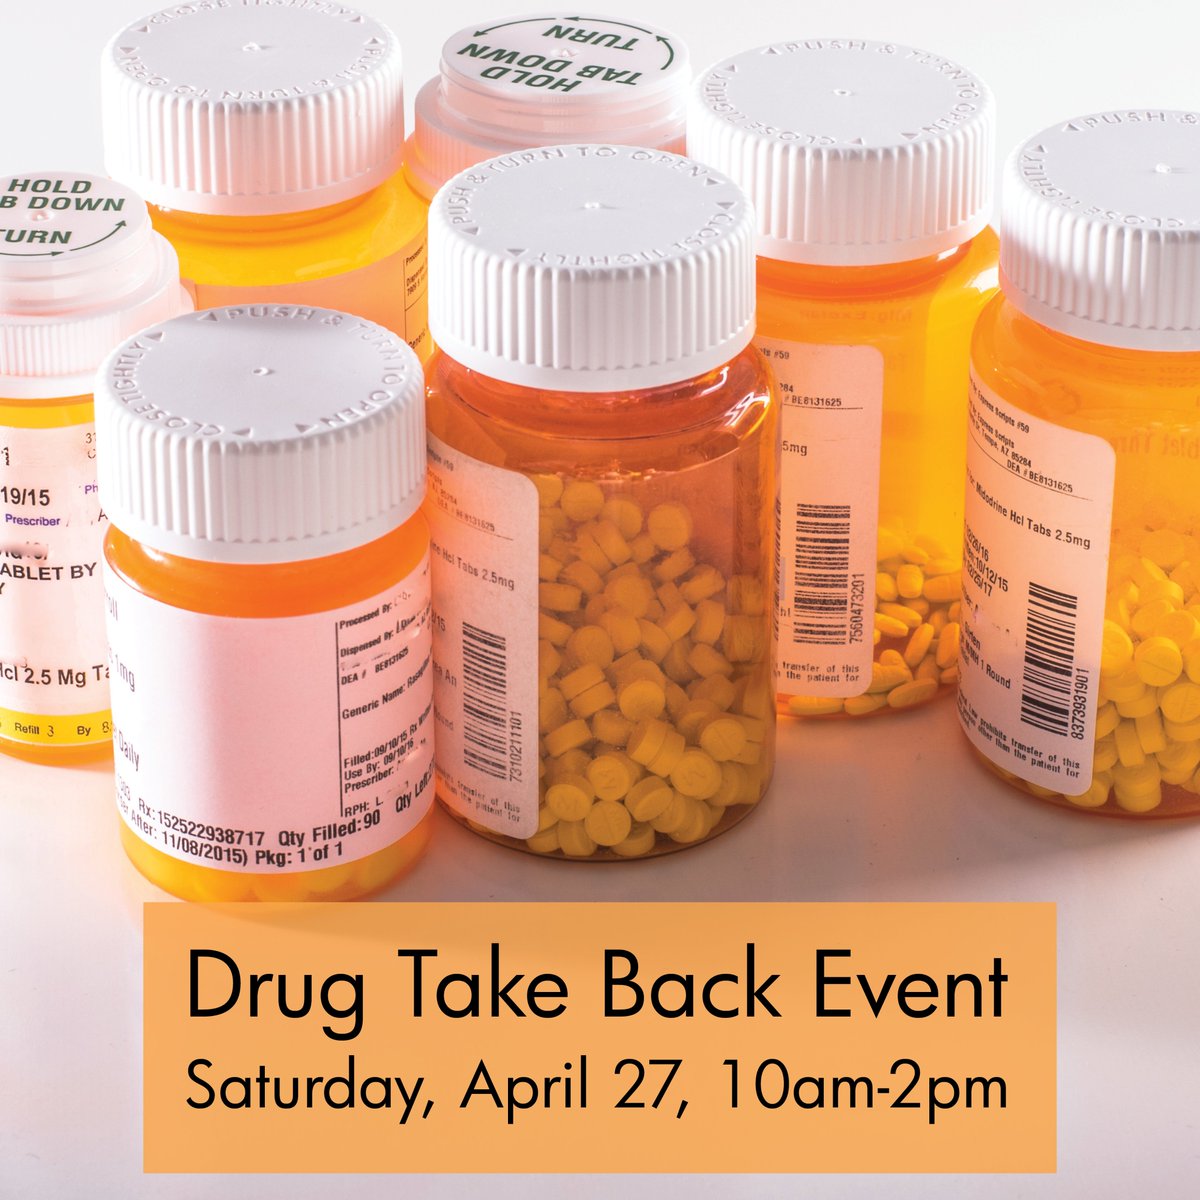 On Saturday, April 27, from 10am-2pm, the City is holding a drug take-back event to help individuals properly dispose of unwanted or expired prescription and over-the-counter medicines. ci.oswego.or.us/community/drug… #LakeOswego #DrugTakeBack